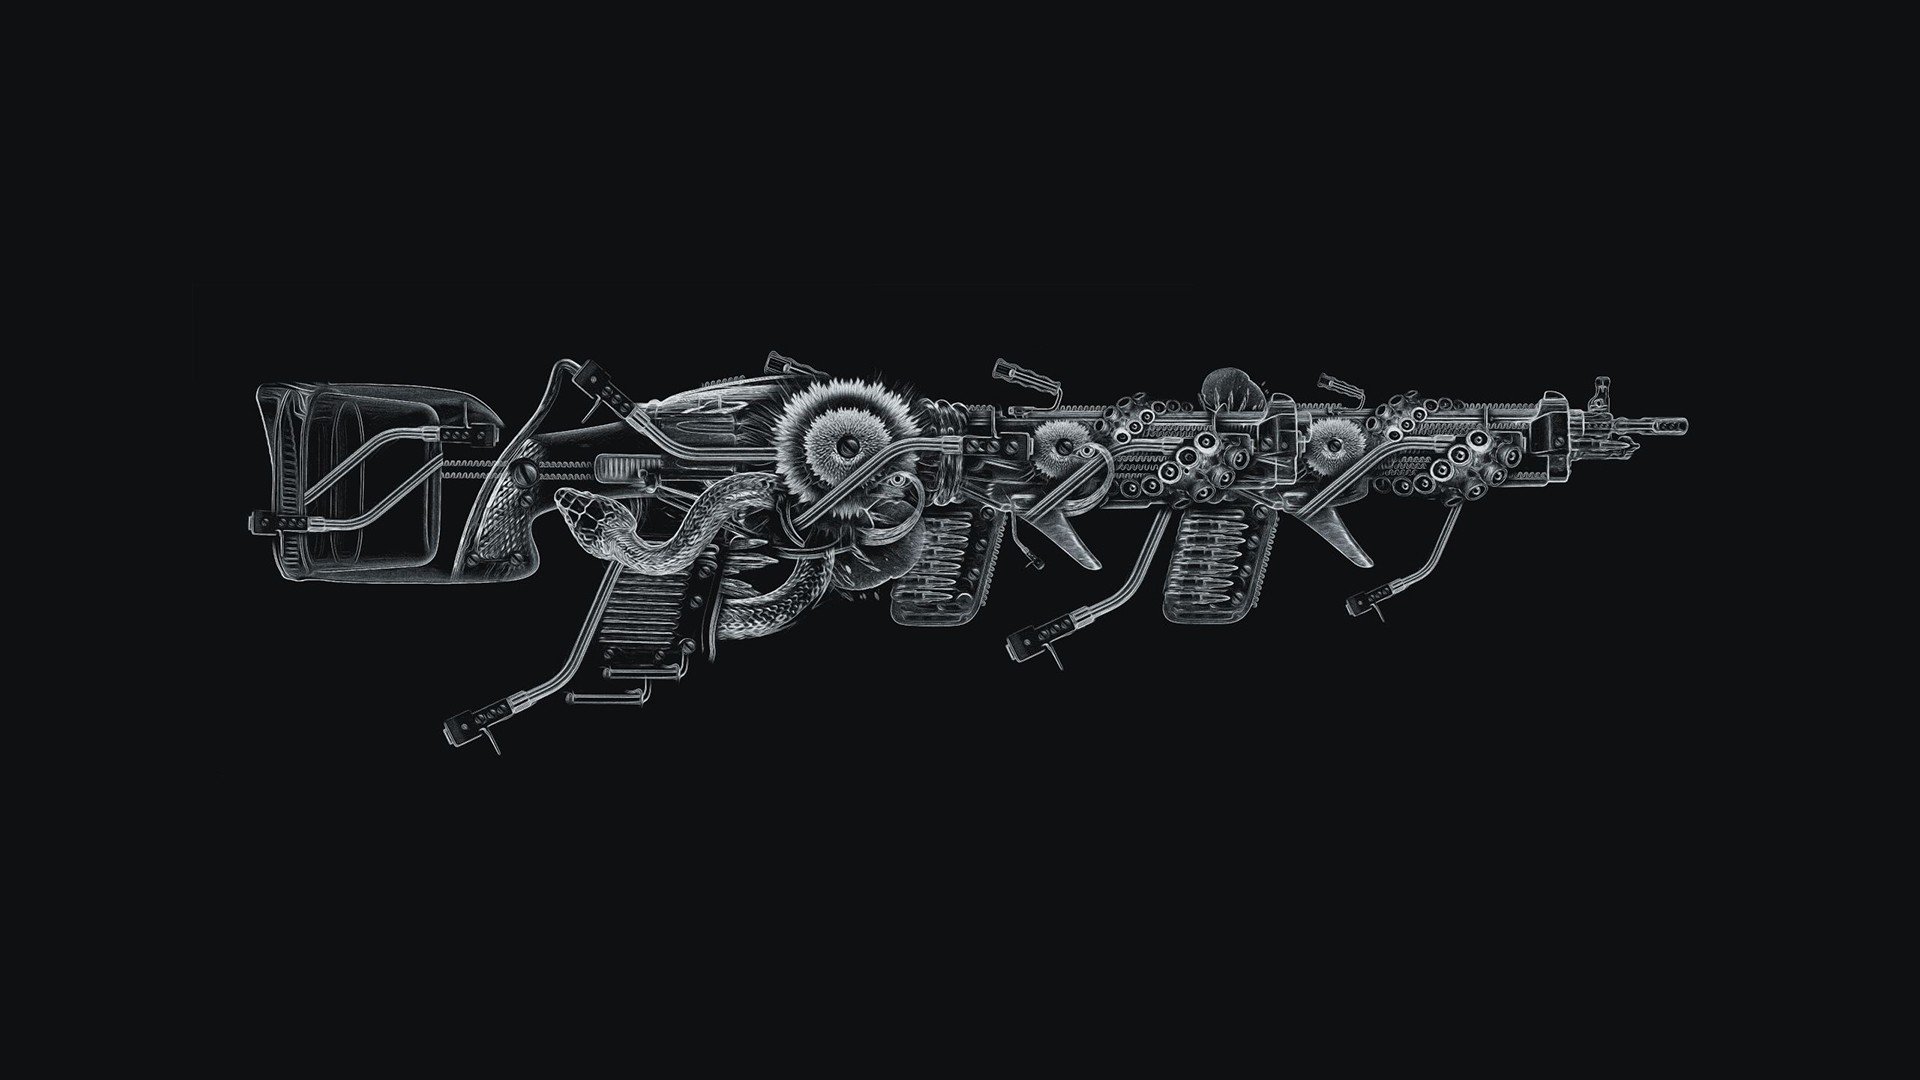 black, Guns, Flowers, Tentacles, Snakes, Octopuses, Turntables, Ammunition, Photo, Manipulation, Nicolas, Obery Wallpaper